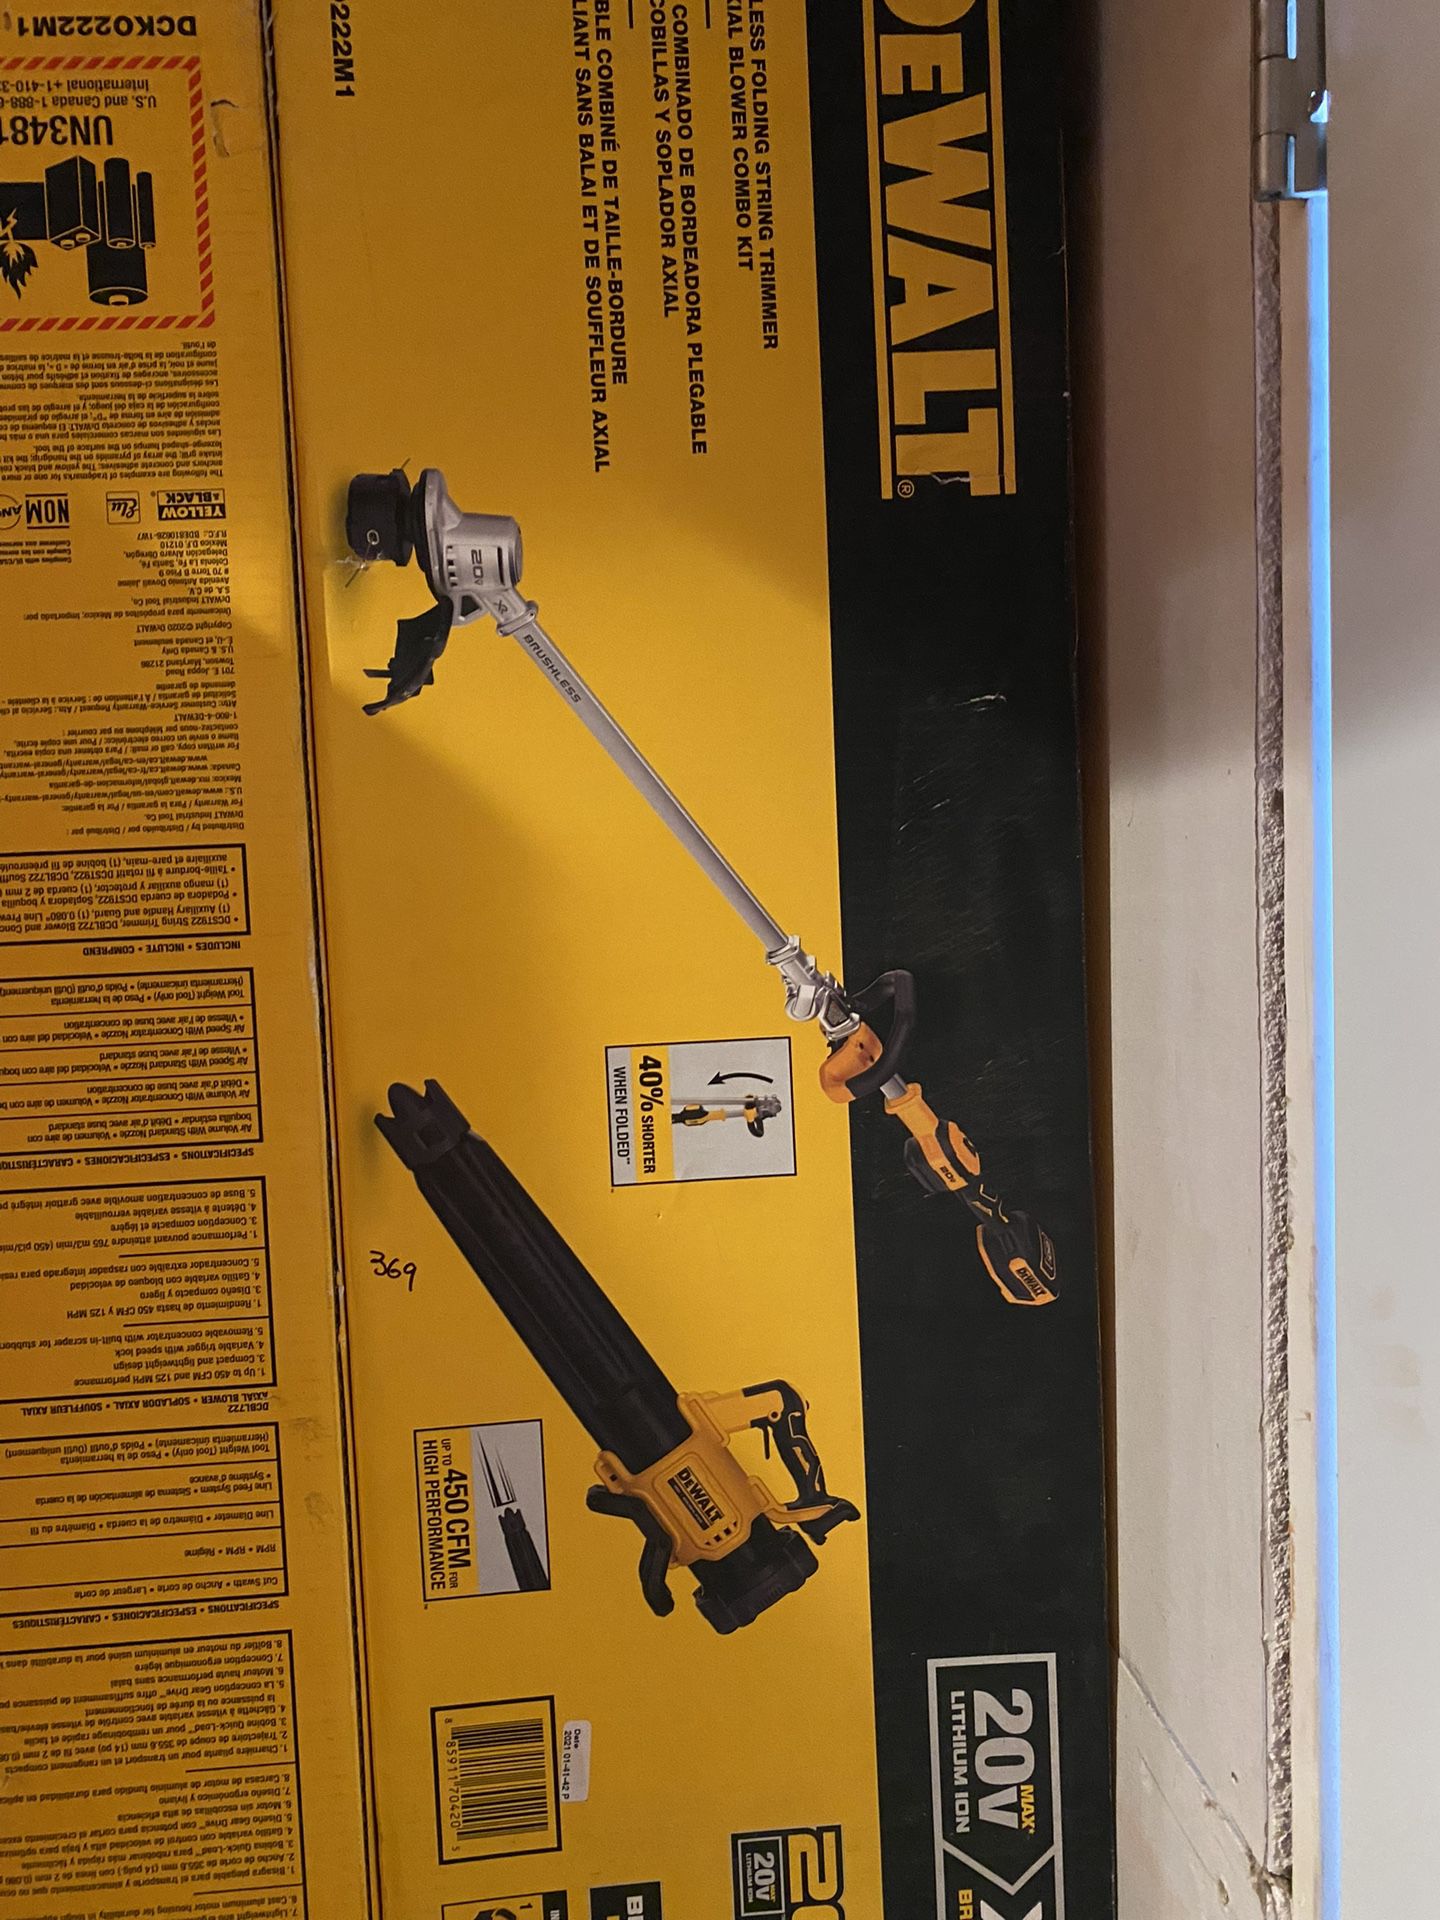 DEWALT 20V MAX Cordless Battery Powered String Trimmer & Leaf Blower Combo Kit with (1) 4.0 Ah Battery and Charger